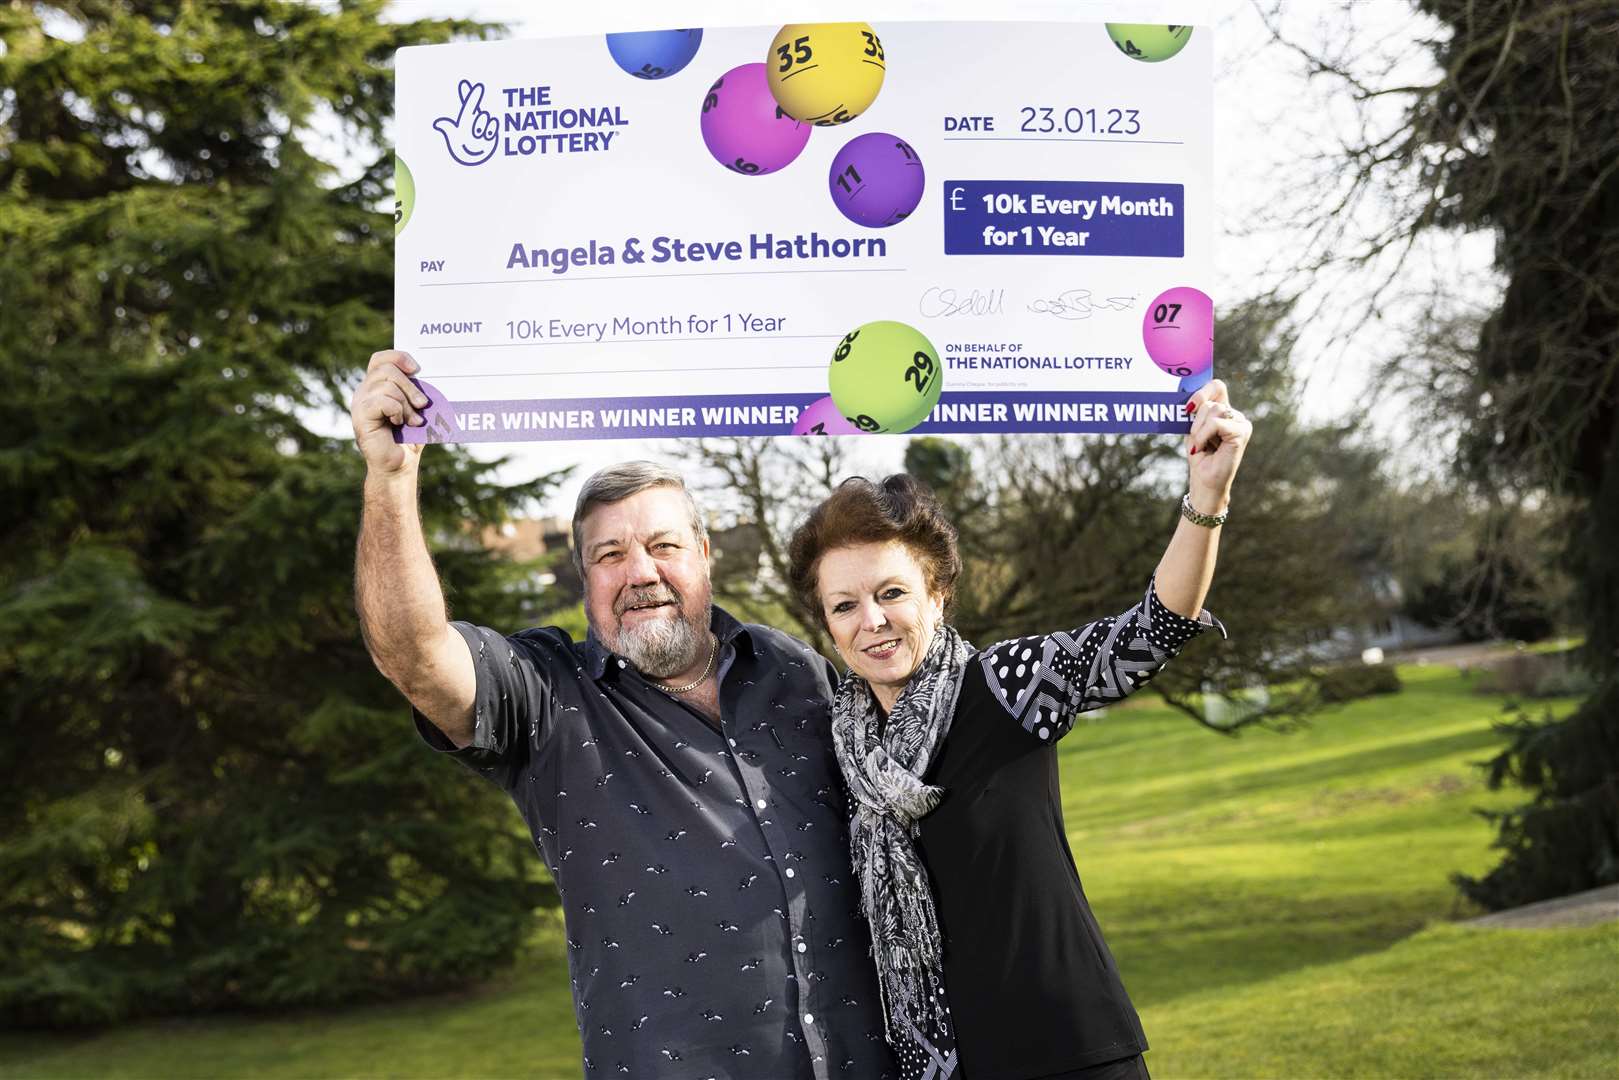 Angela and Steve Hathorn from Orpington celebrate winning £10,000 every month for a year on The National Lottery Set For Life. Picture: James Robinson/Camelot